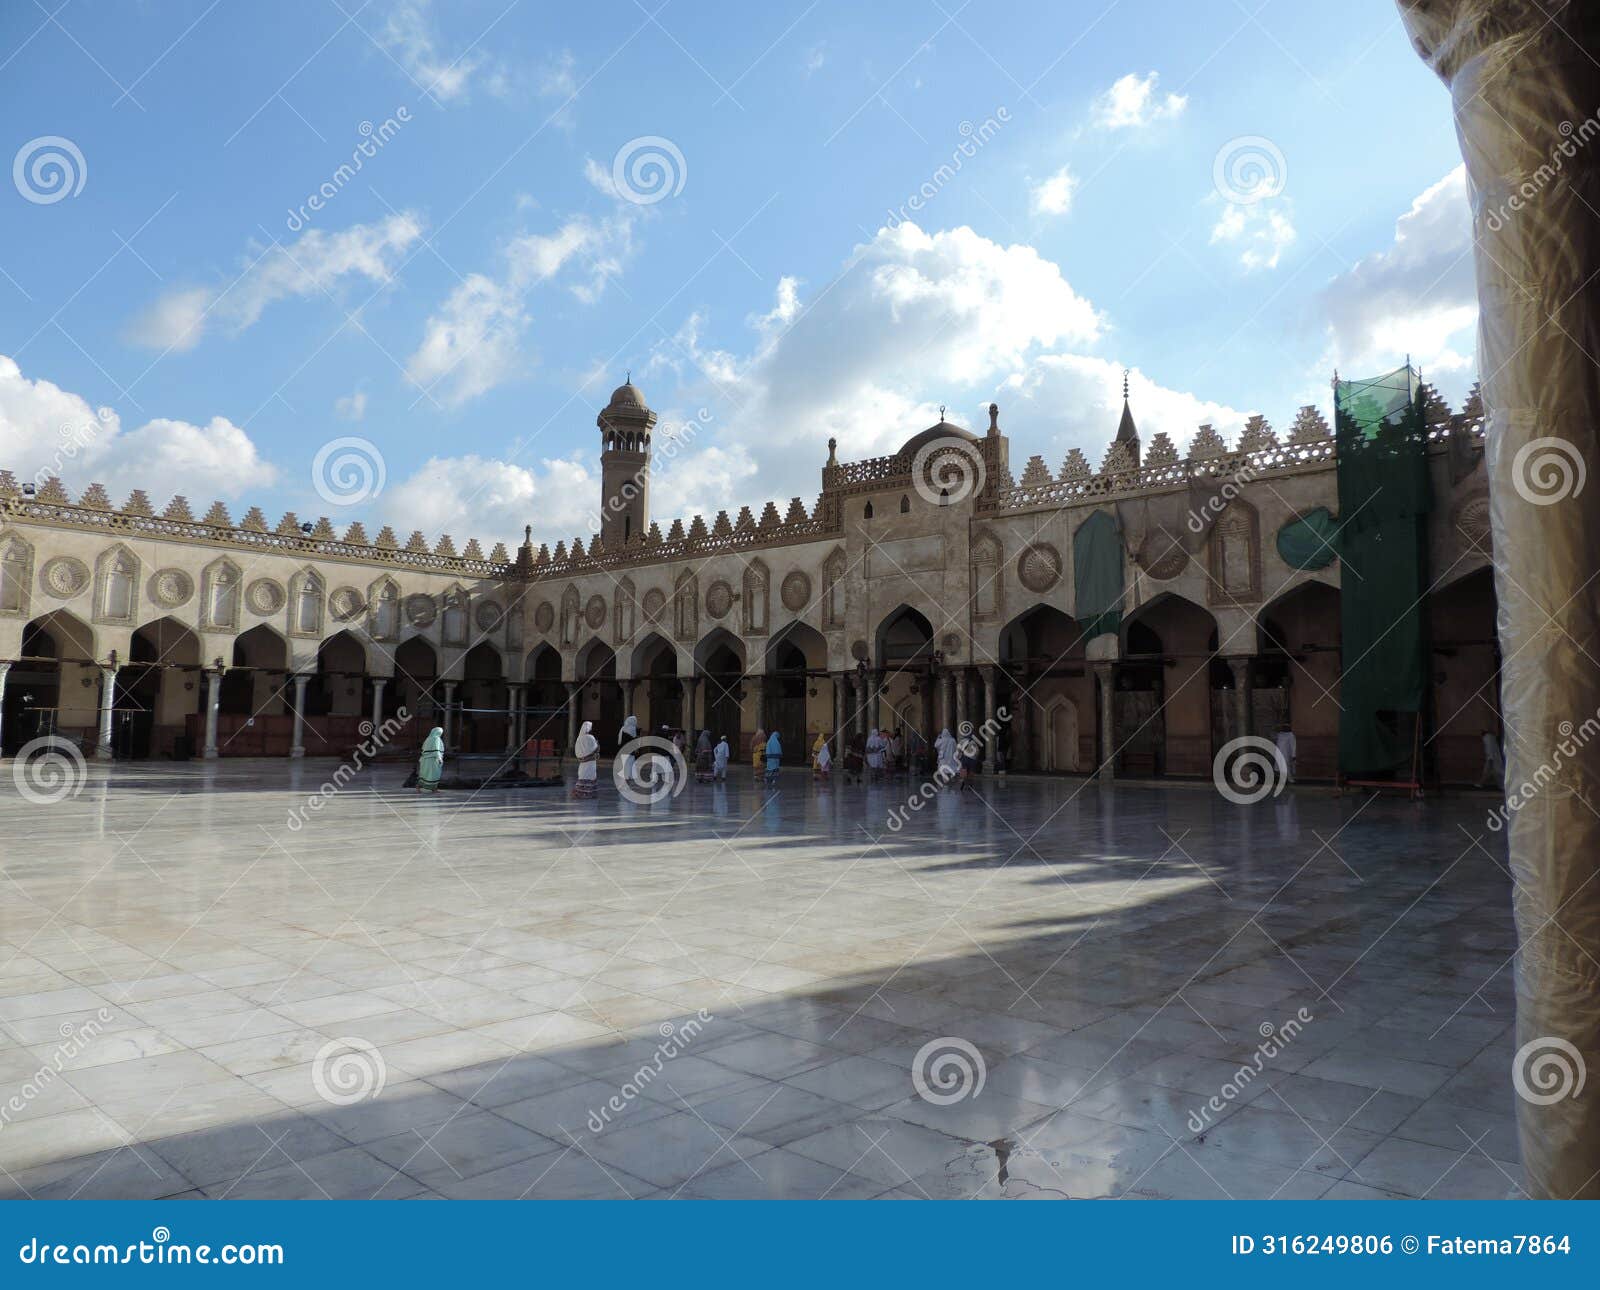 al-azhar mosque in cairo, egypt - ancient architecture - sacred islamic site - africa religious trip